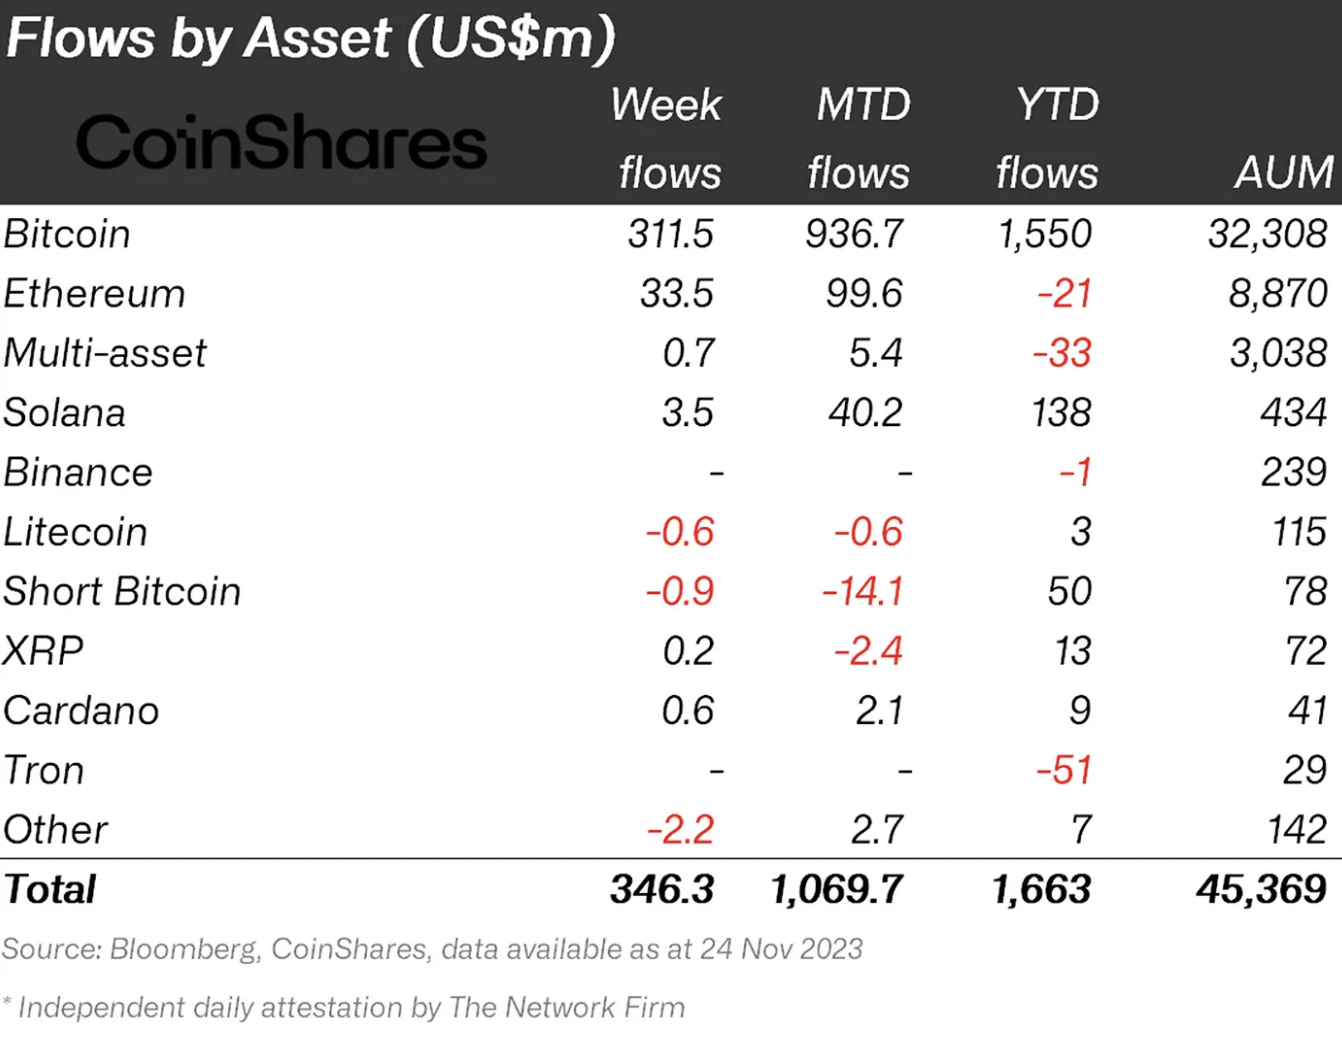 Crypto fund flows by asset